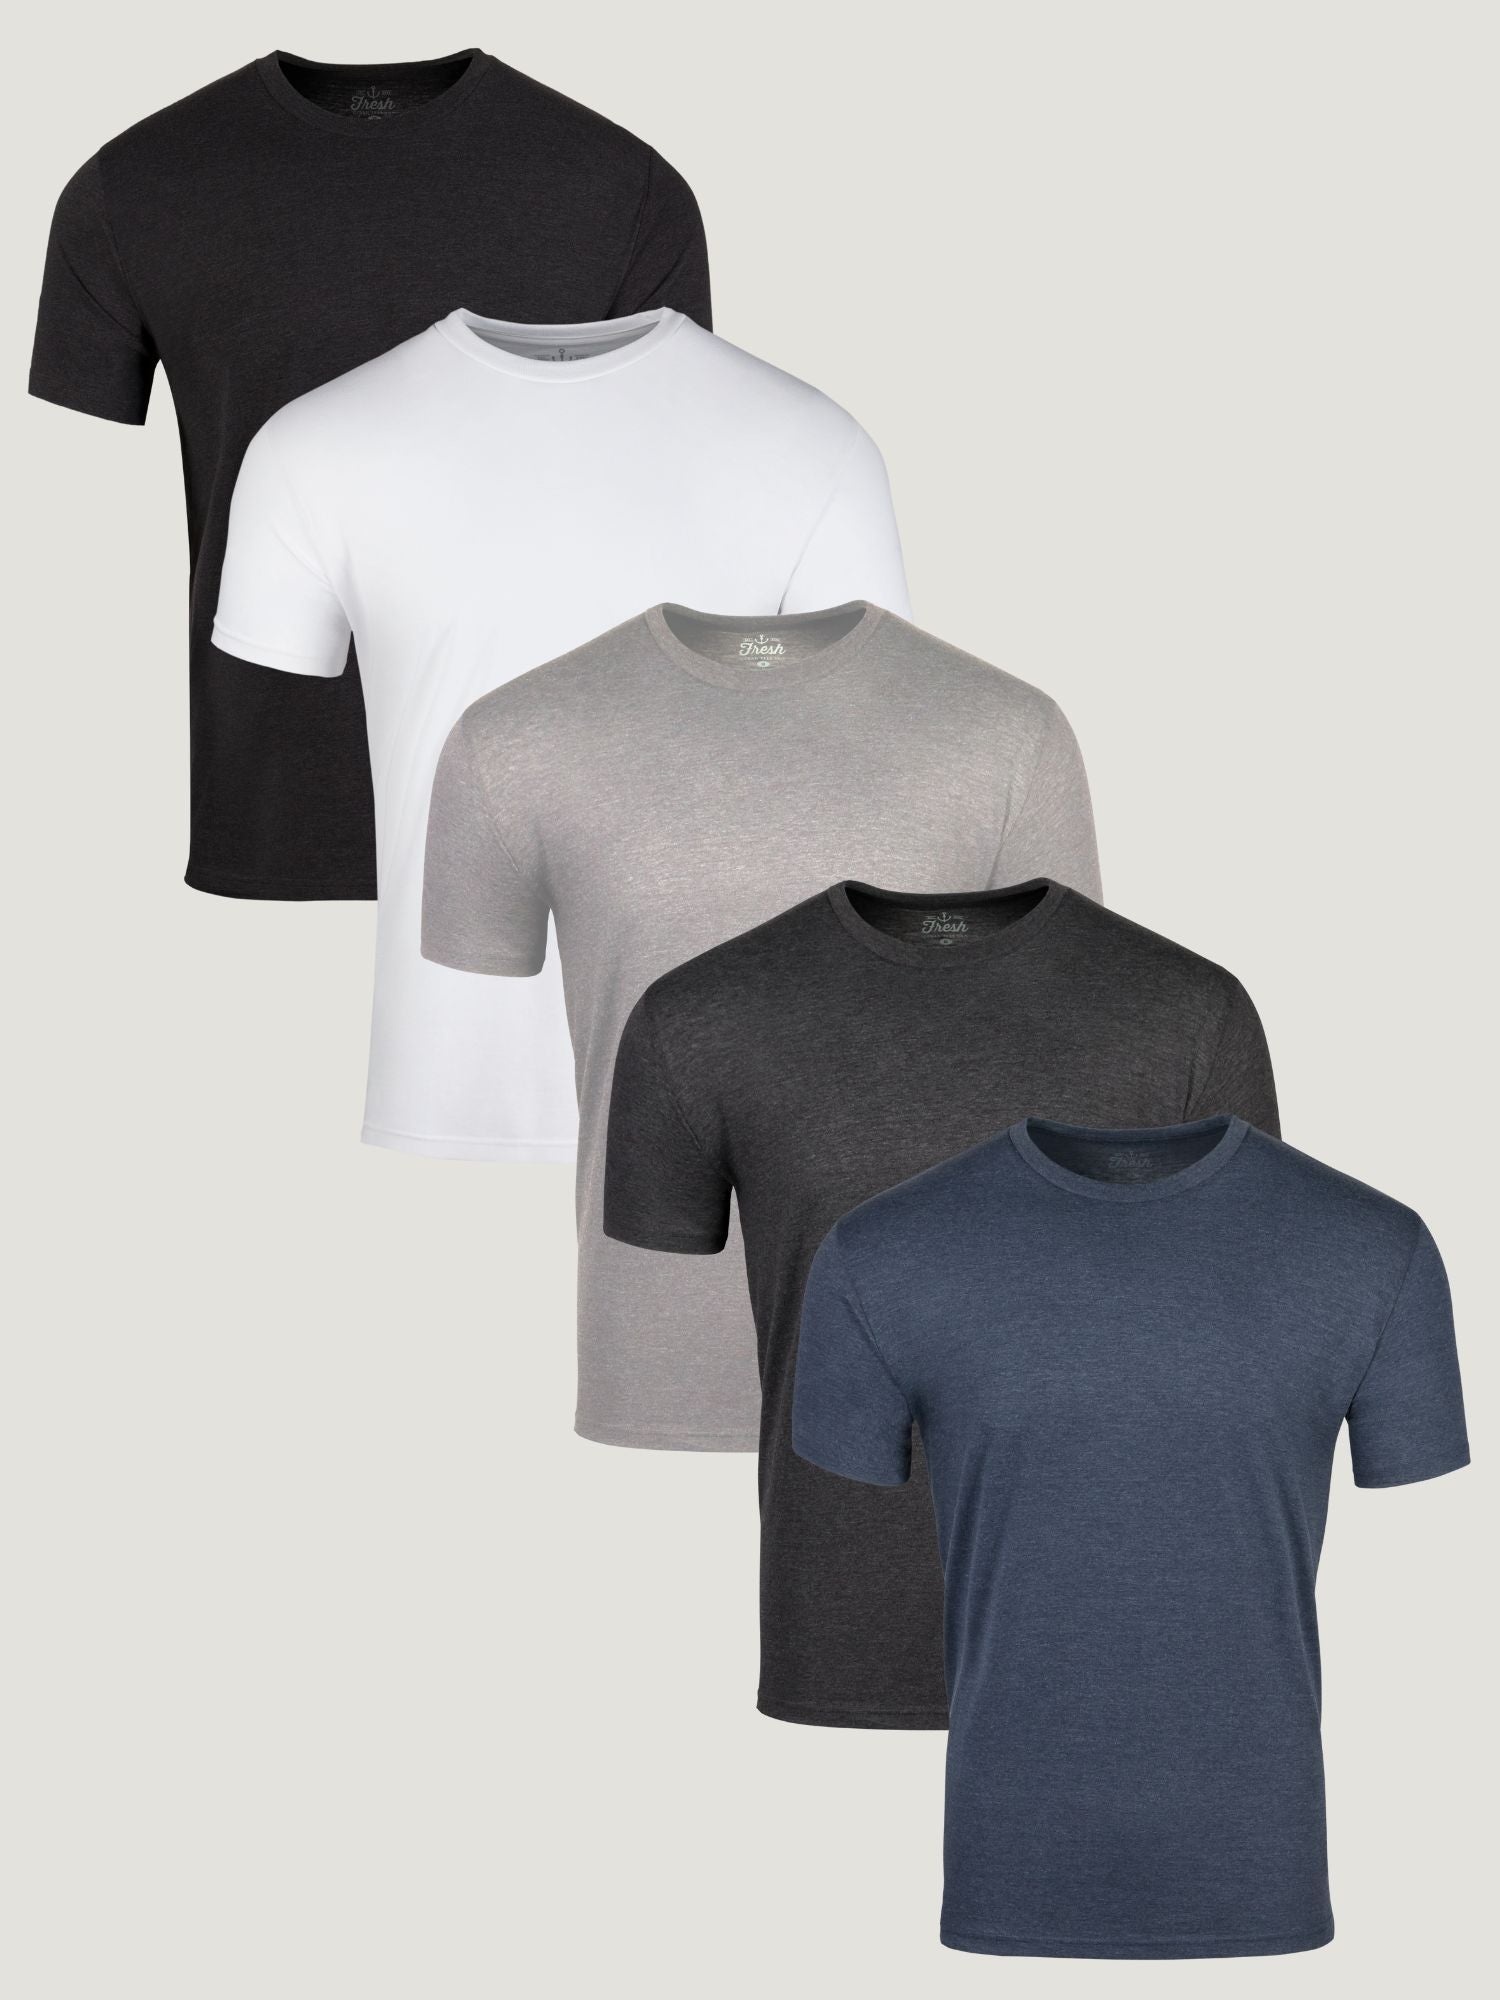 Feed Up Combo of 5 Men's Shirts